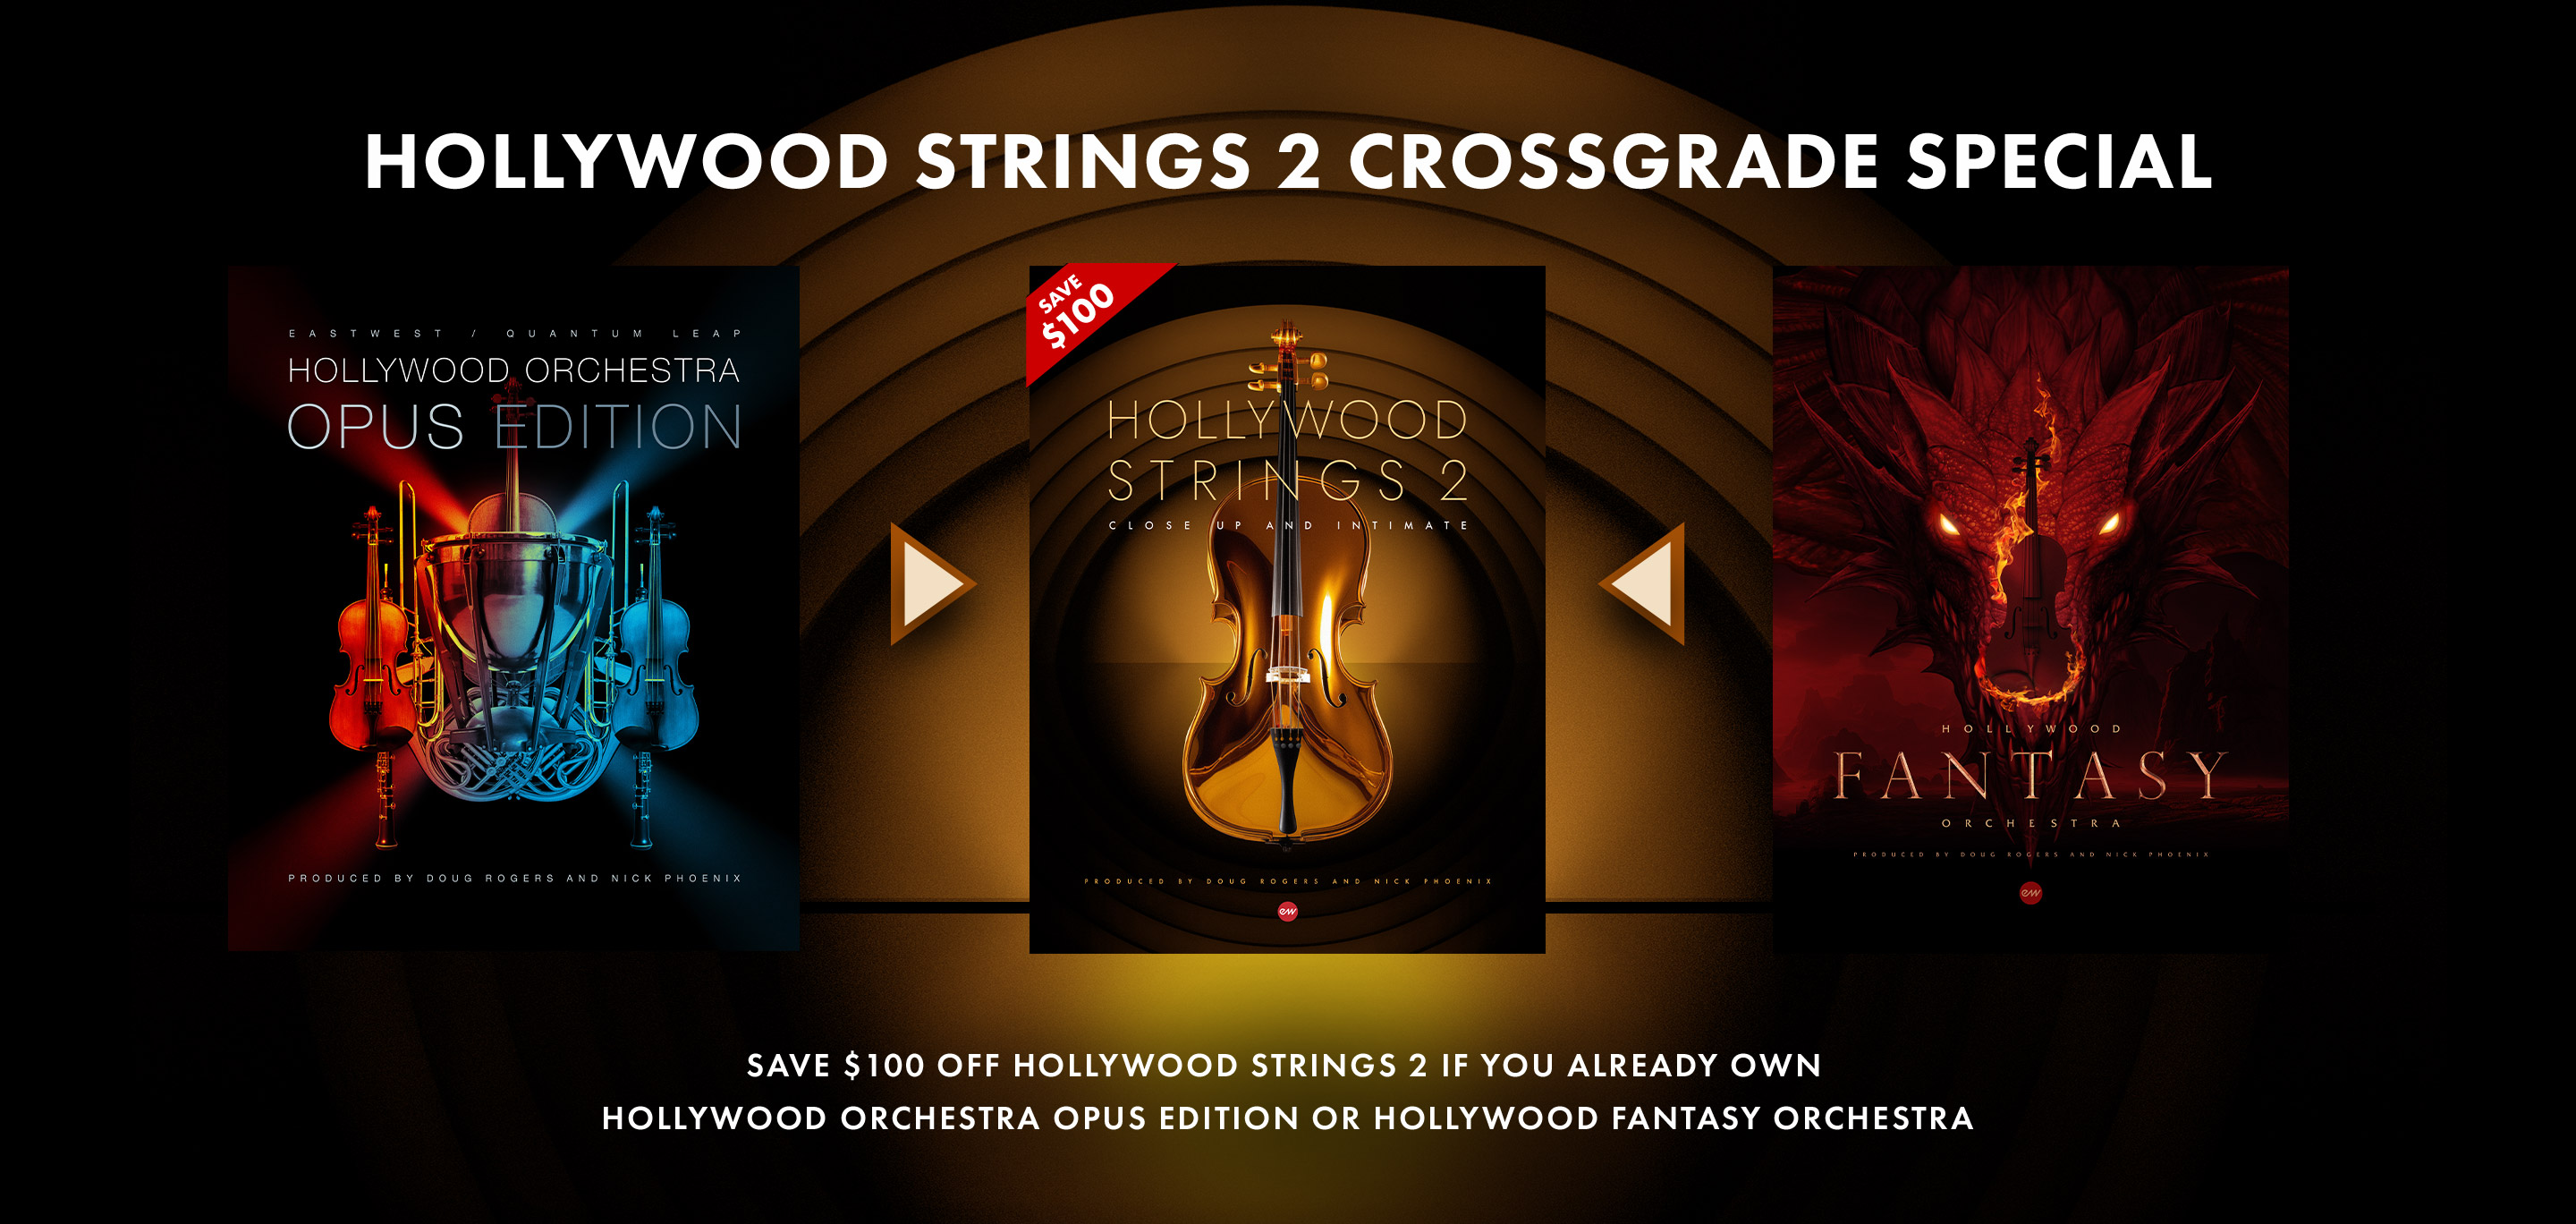 EastWest Hollywood Strings 2 - Produced By Doug Rogers and Nick Phoenix